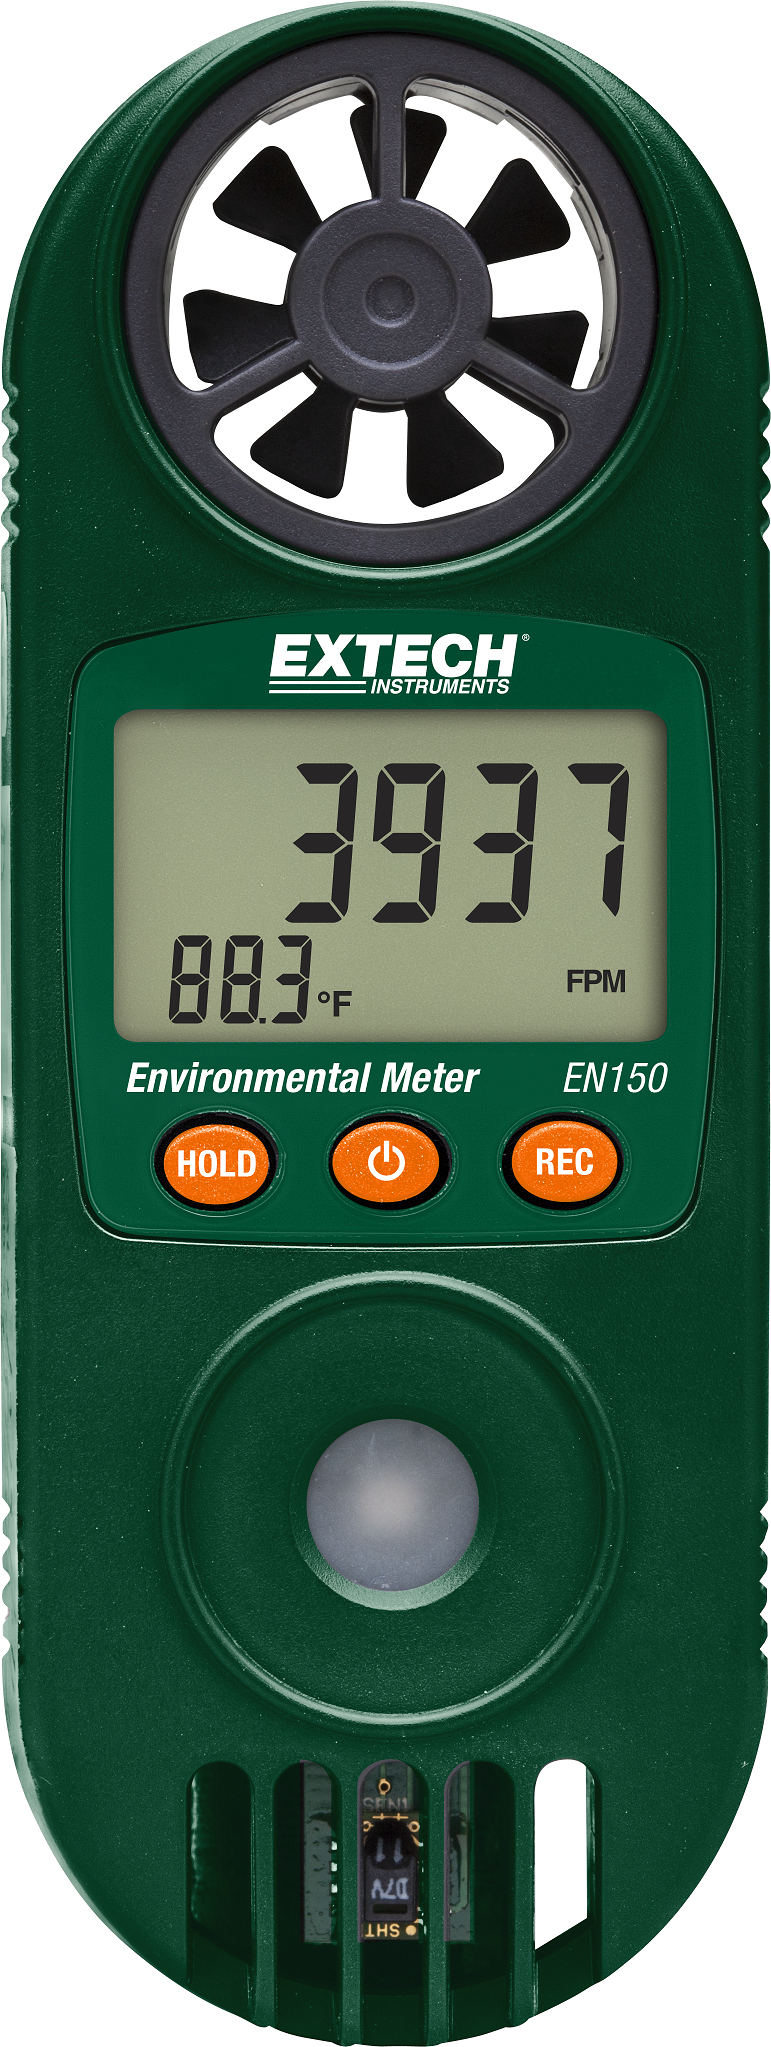 Extech EN150 Compact Hygro-Thermo-Anemometer with UV Light